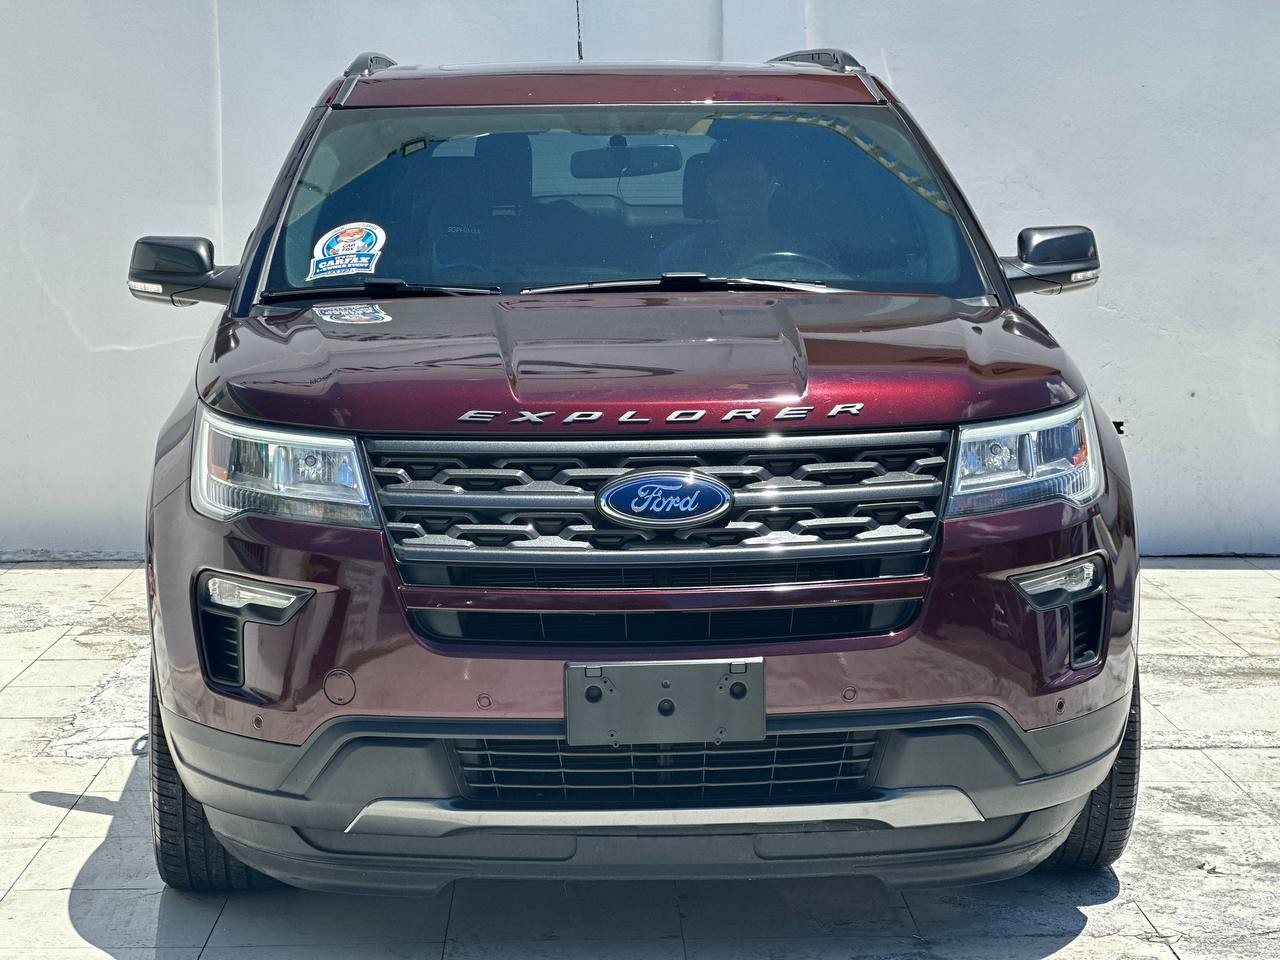 jeepetas y camionetas - FORD EXPLORER PANORAMICA 4x4 2018CLEAN CARFAX 1